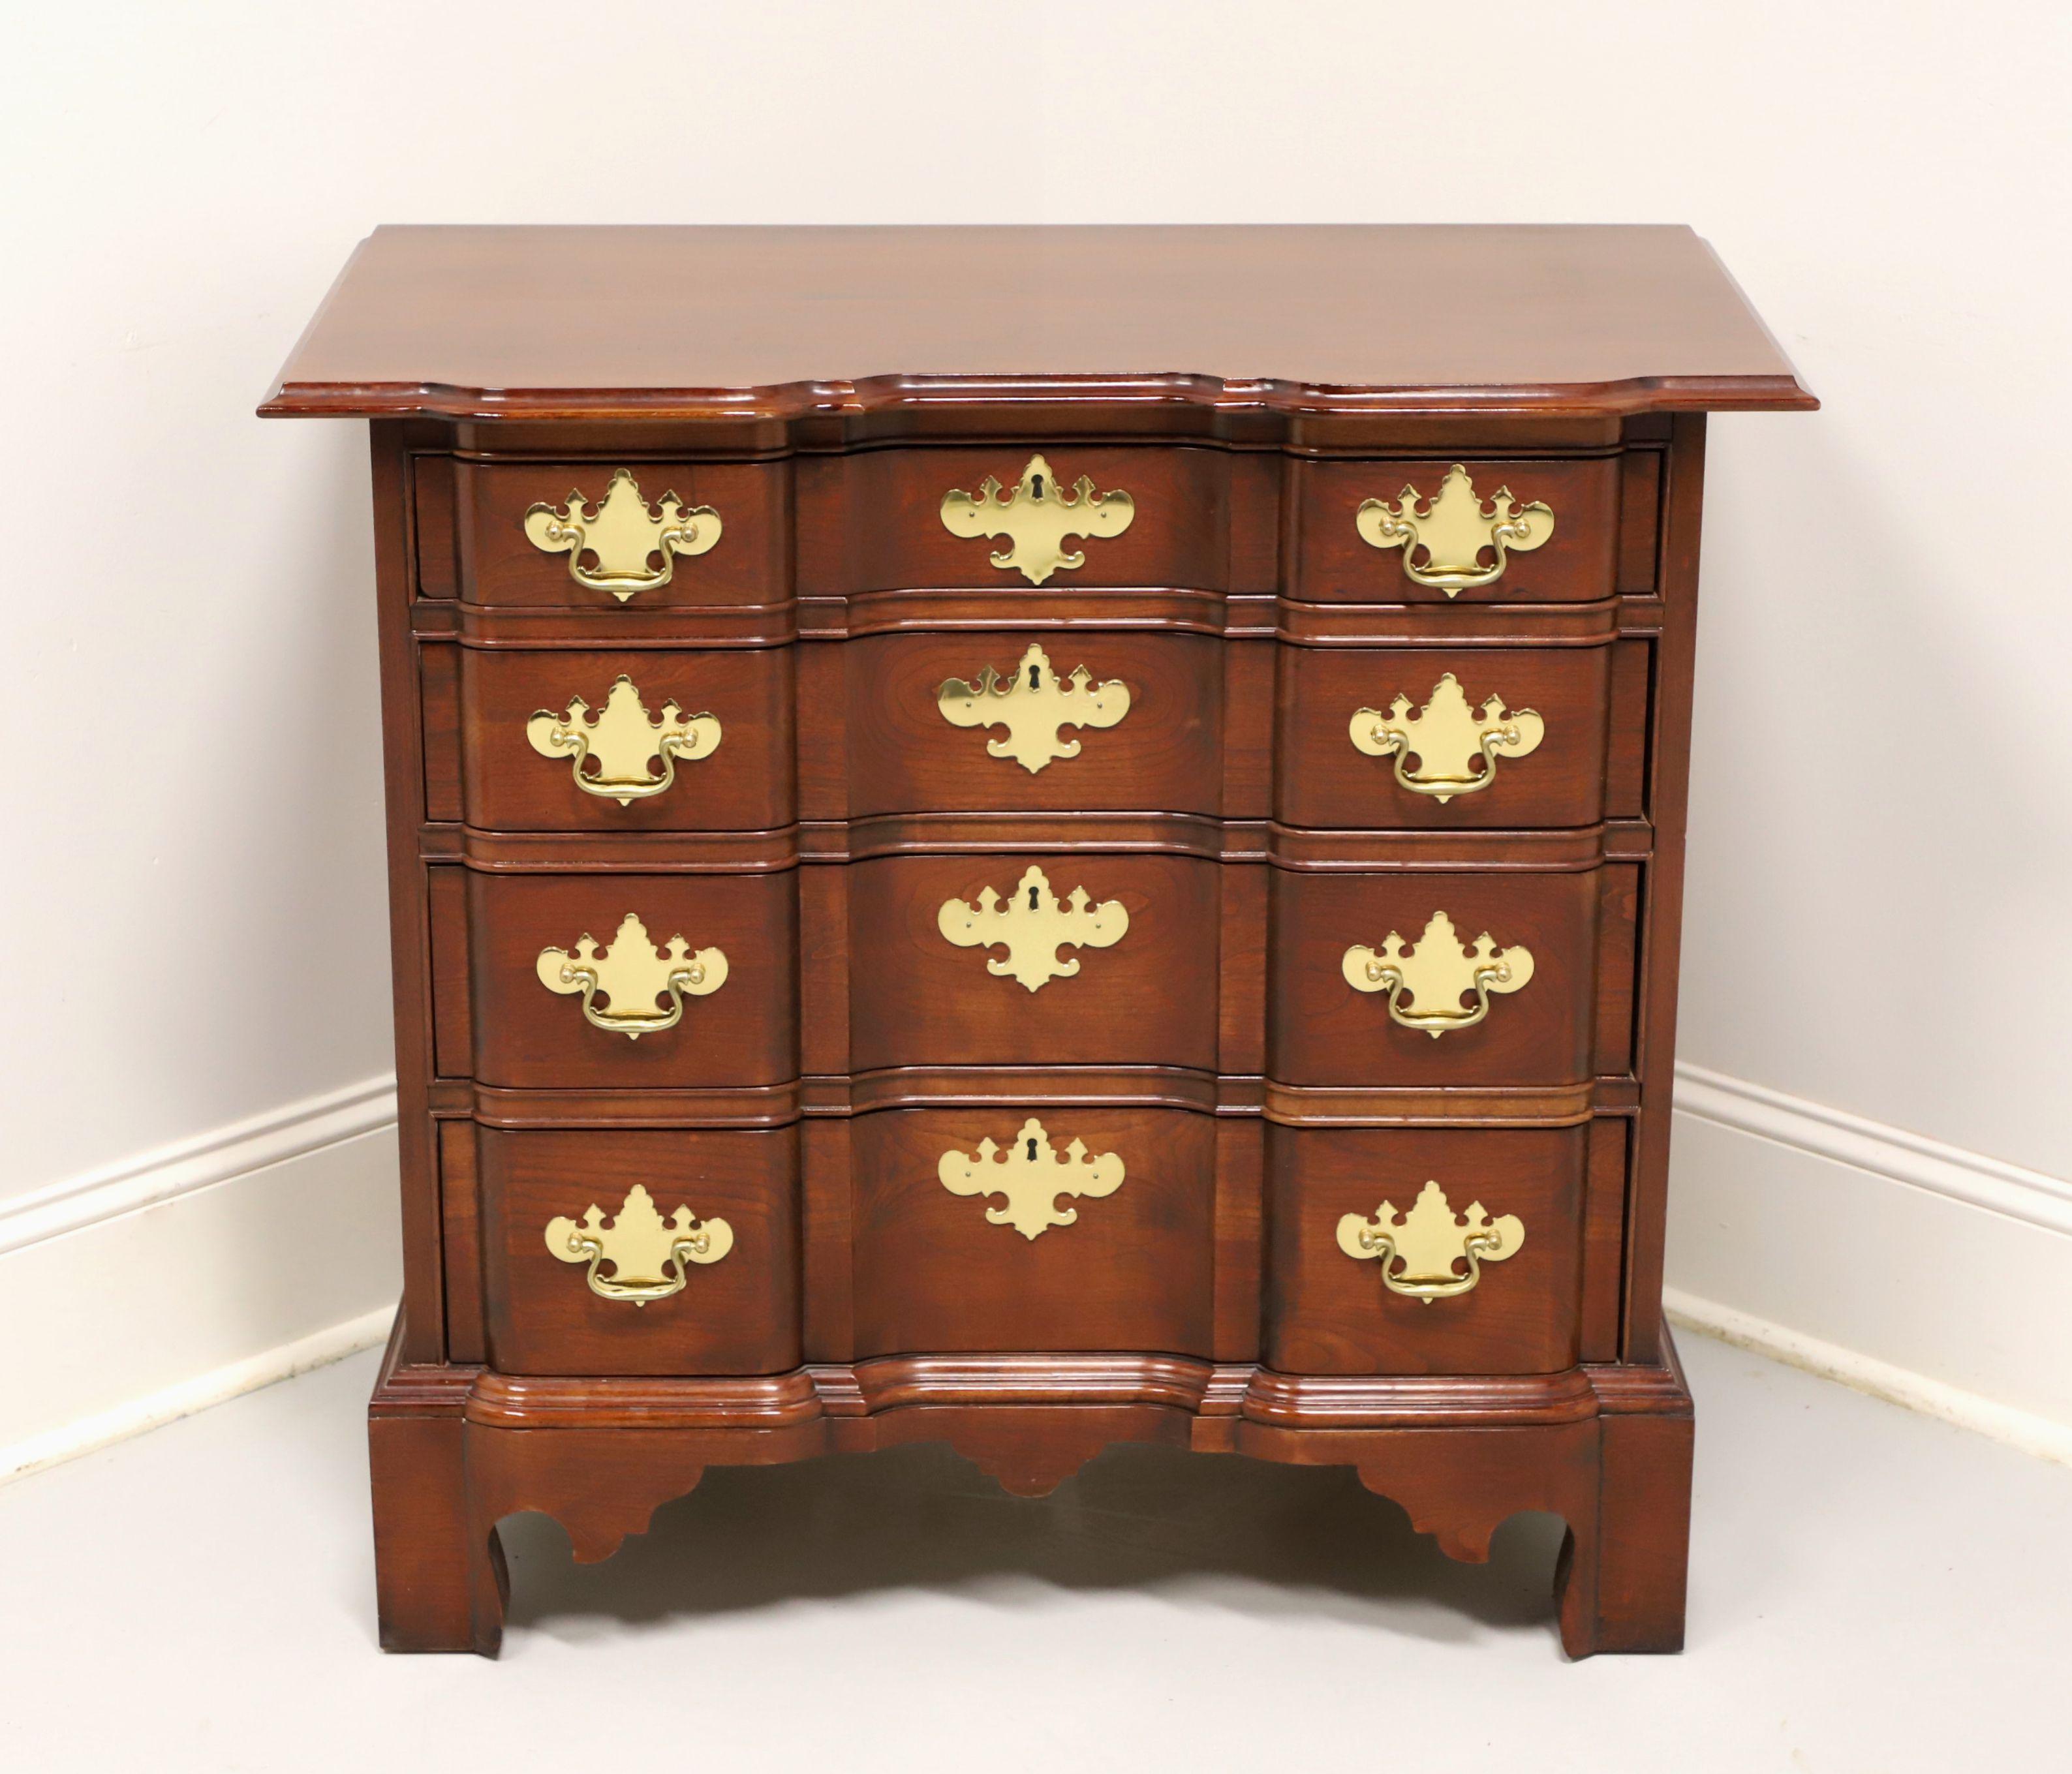 A Chippendale style block front bachelor chest by Councill Craftsmen. Solid cherry with brass hardware and bracket feet. Features four drawers of dovetail construction with faux keyhole escutcheons. Made in the USA, in the late 20th